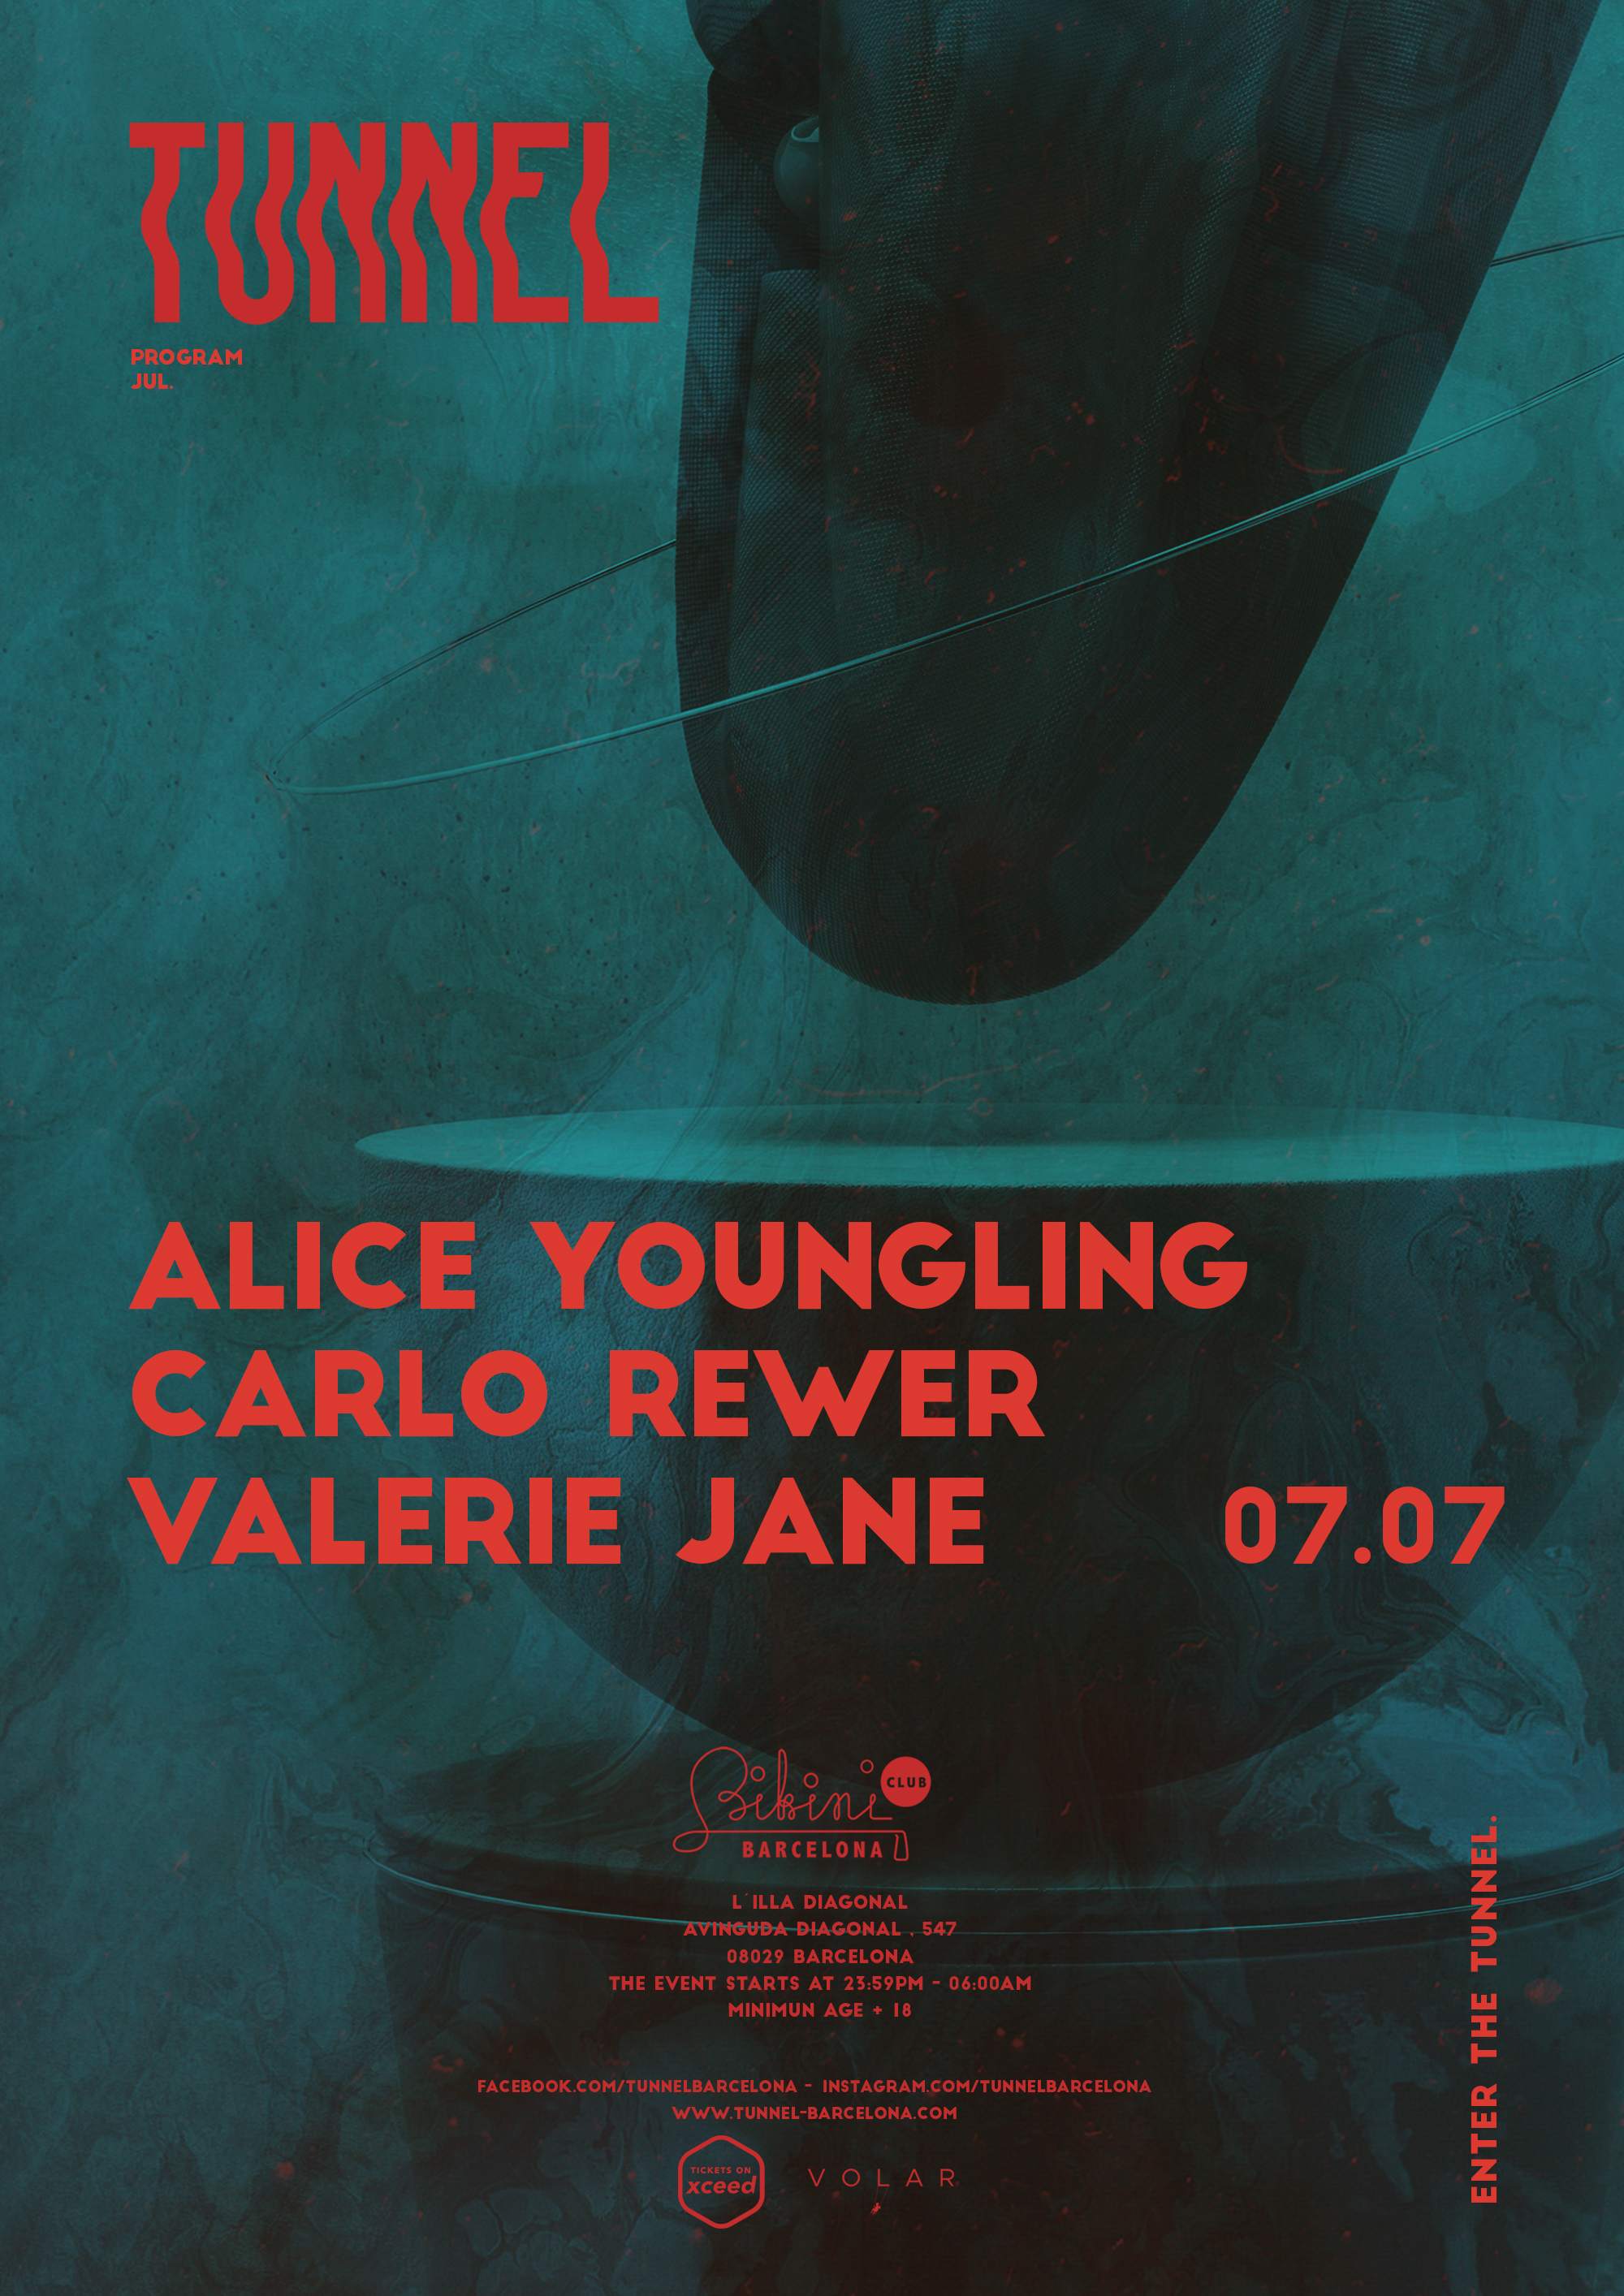 Tunnel pres: Alice Youngling, Carlo Rewer, Valerie Jane - フライヤー表